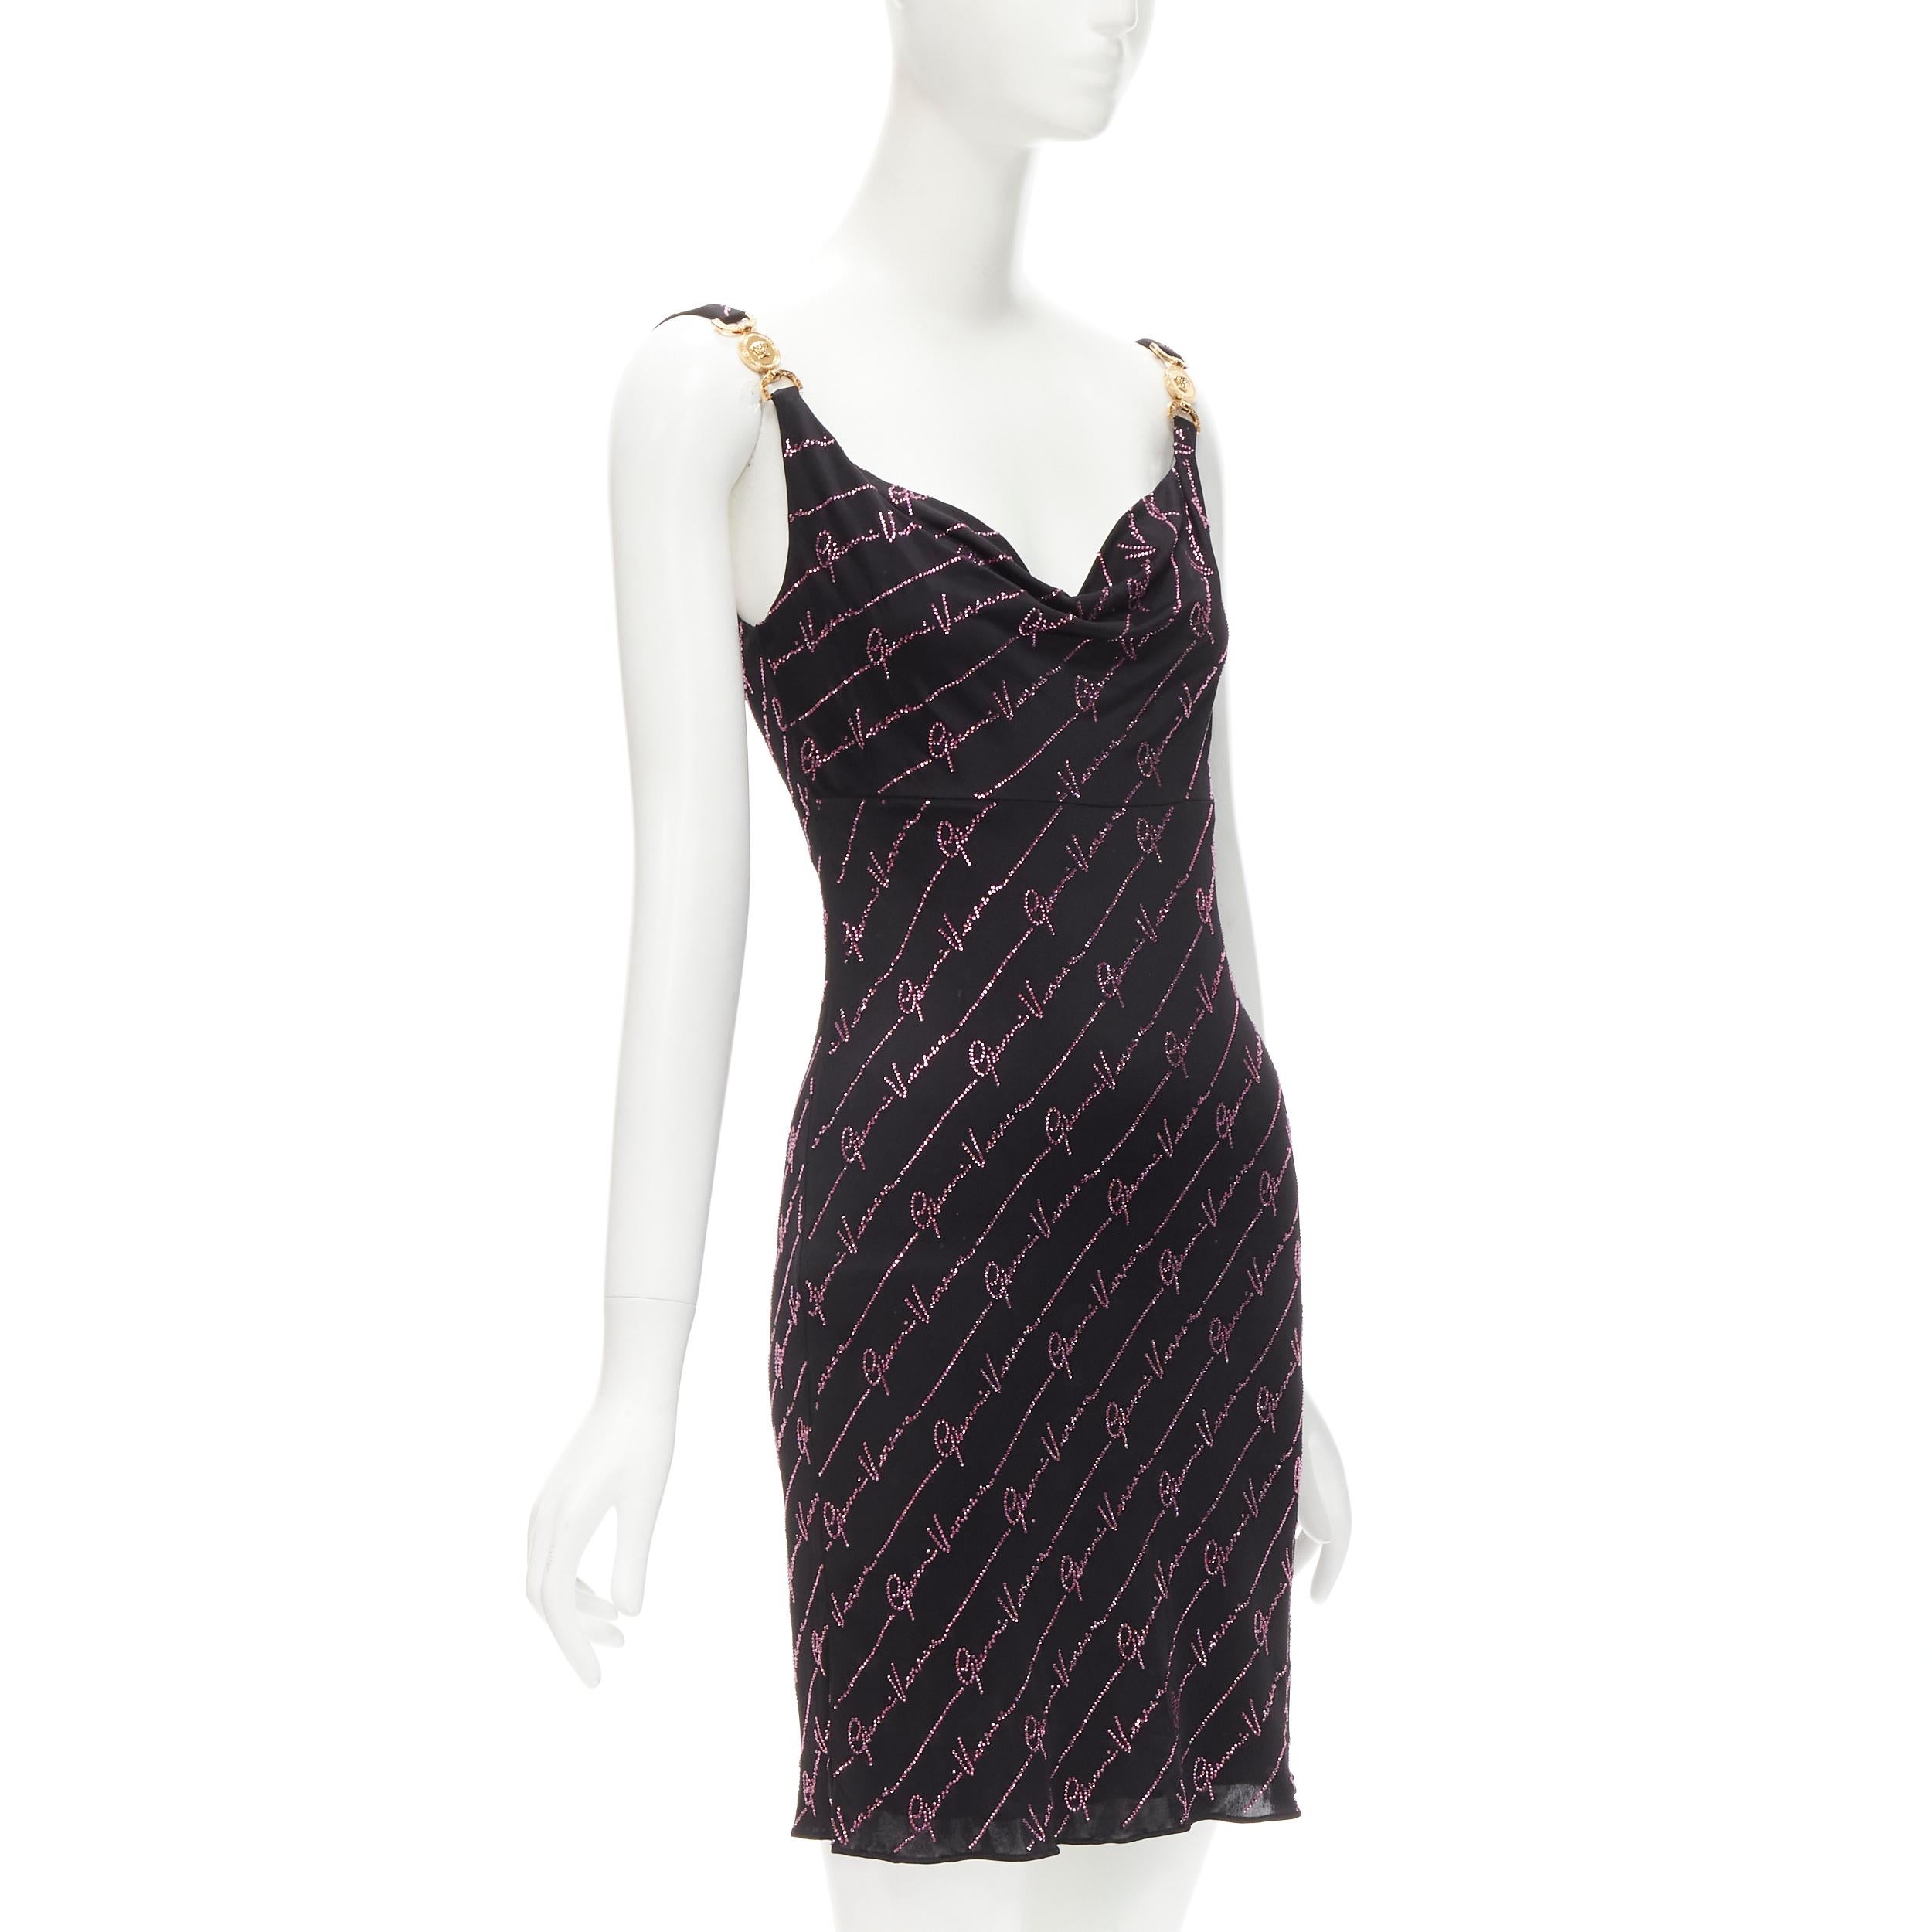 new VERSACE Gianni Signature black pink crystal encrusted Medusa dress IT38 XS
Brand: Versace
Collection: Resot 2020 
Extra Detail: Stretch fabric. Draped neckline. Gold-tone Signature Medusa buckle at shoulder strap. Fully encrusted in sparkly